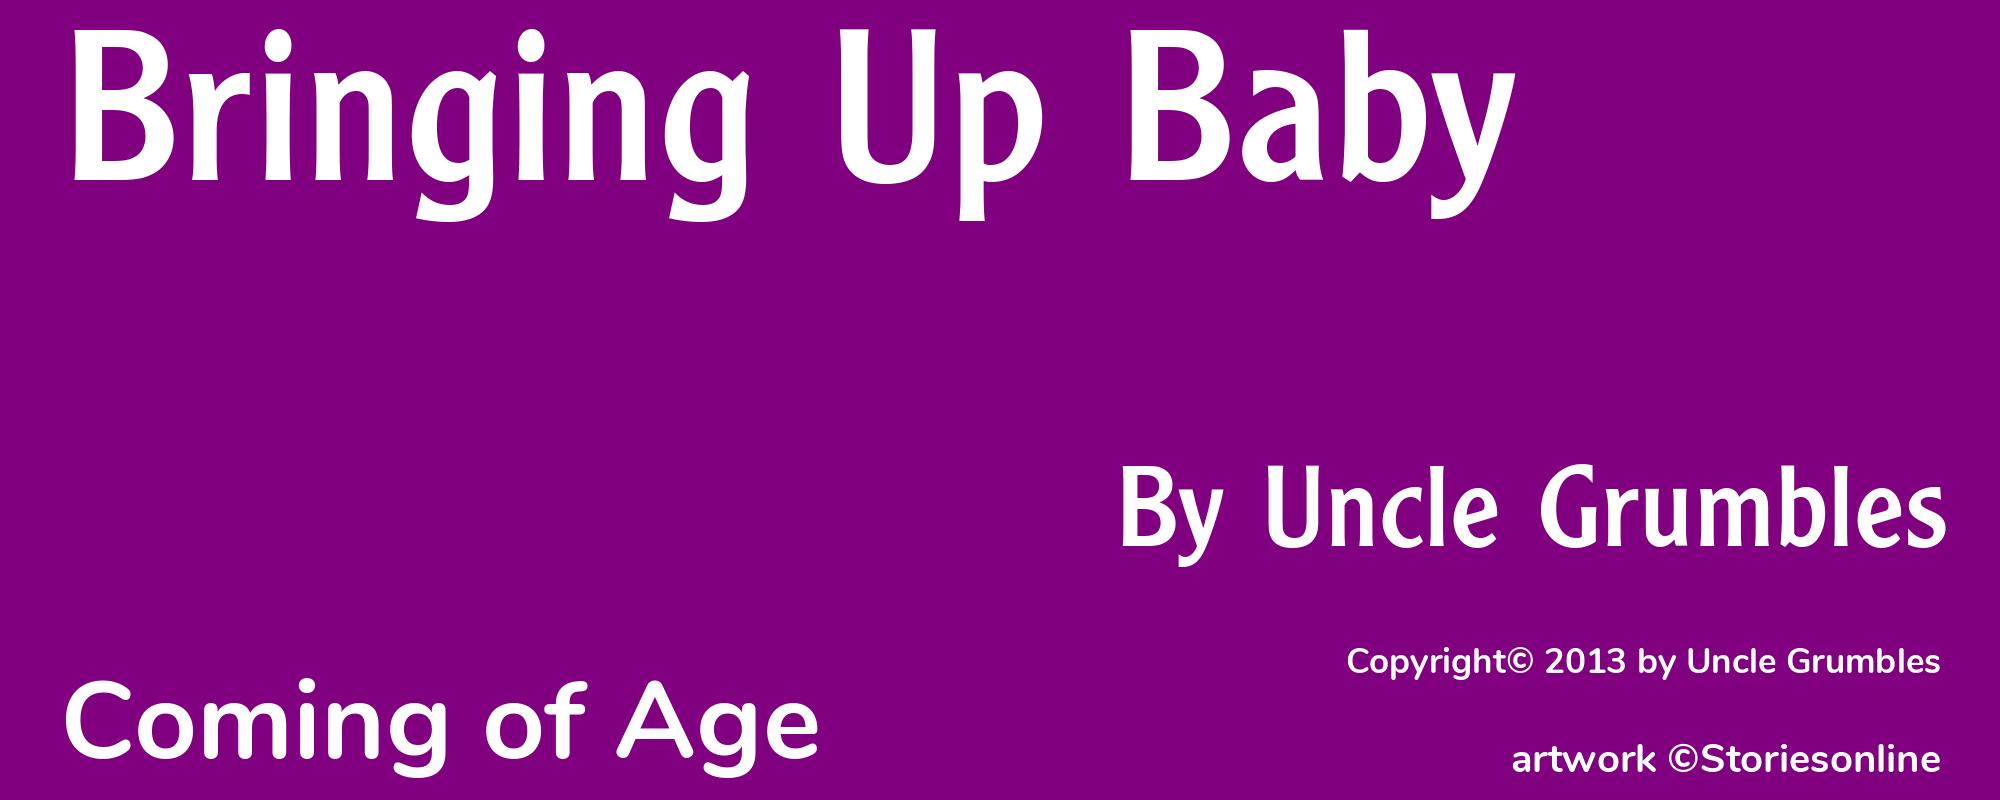 Bringing Up Baby - Cover